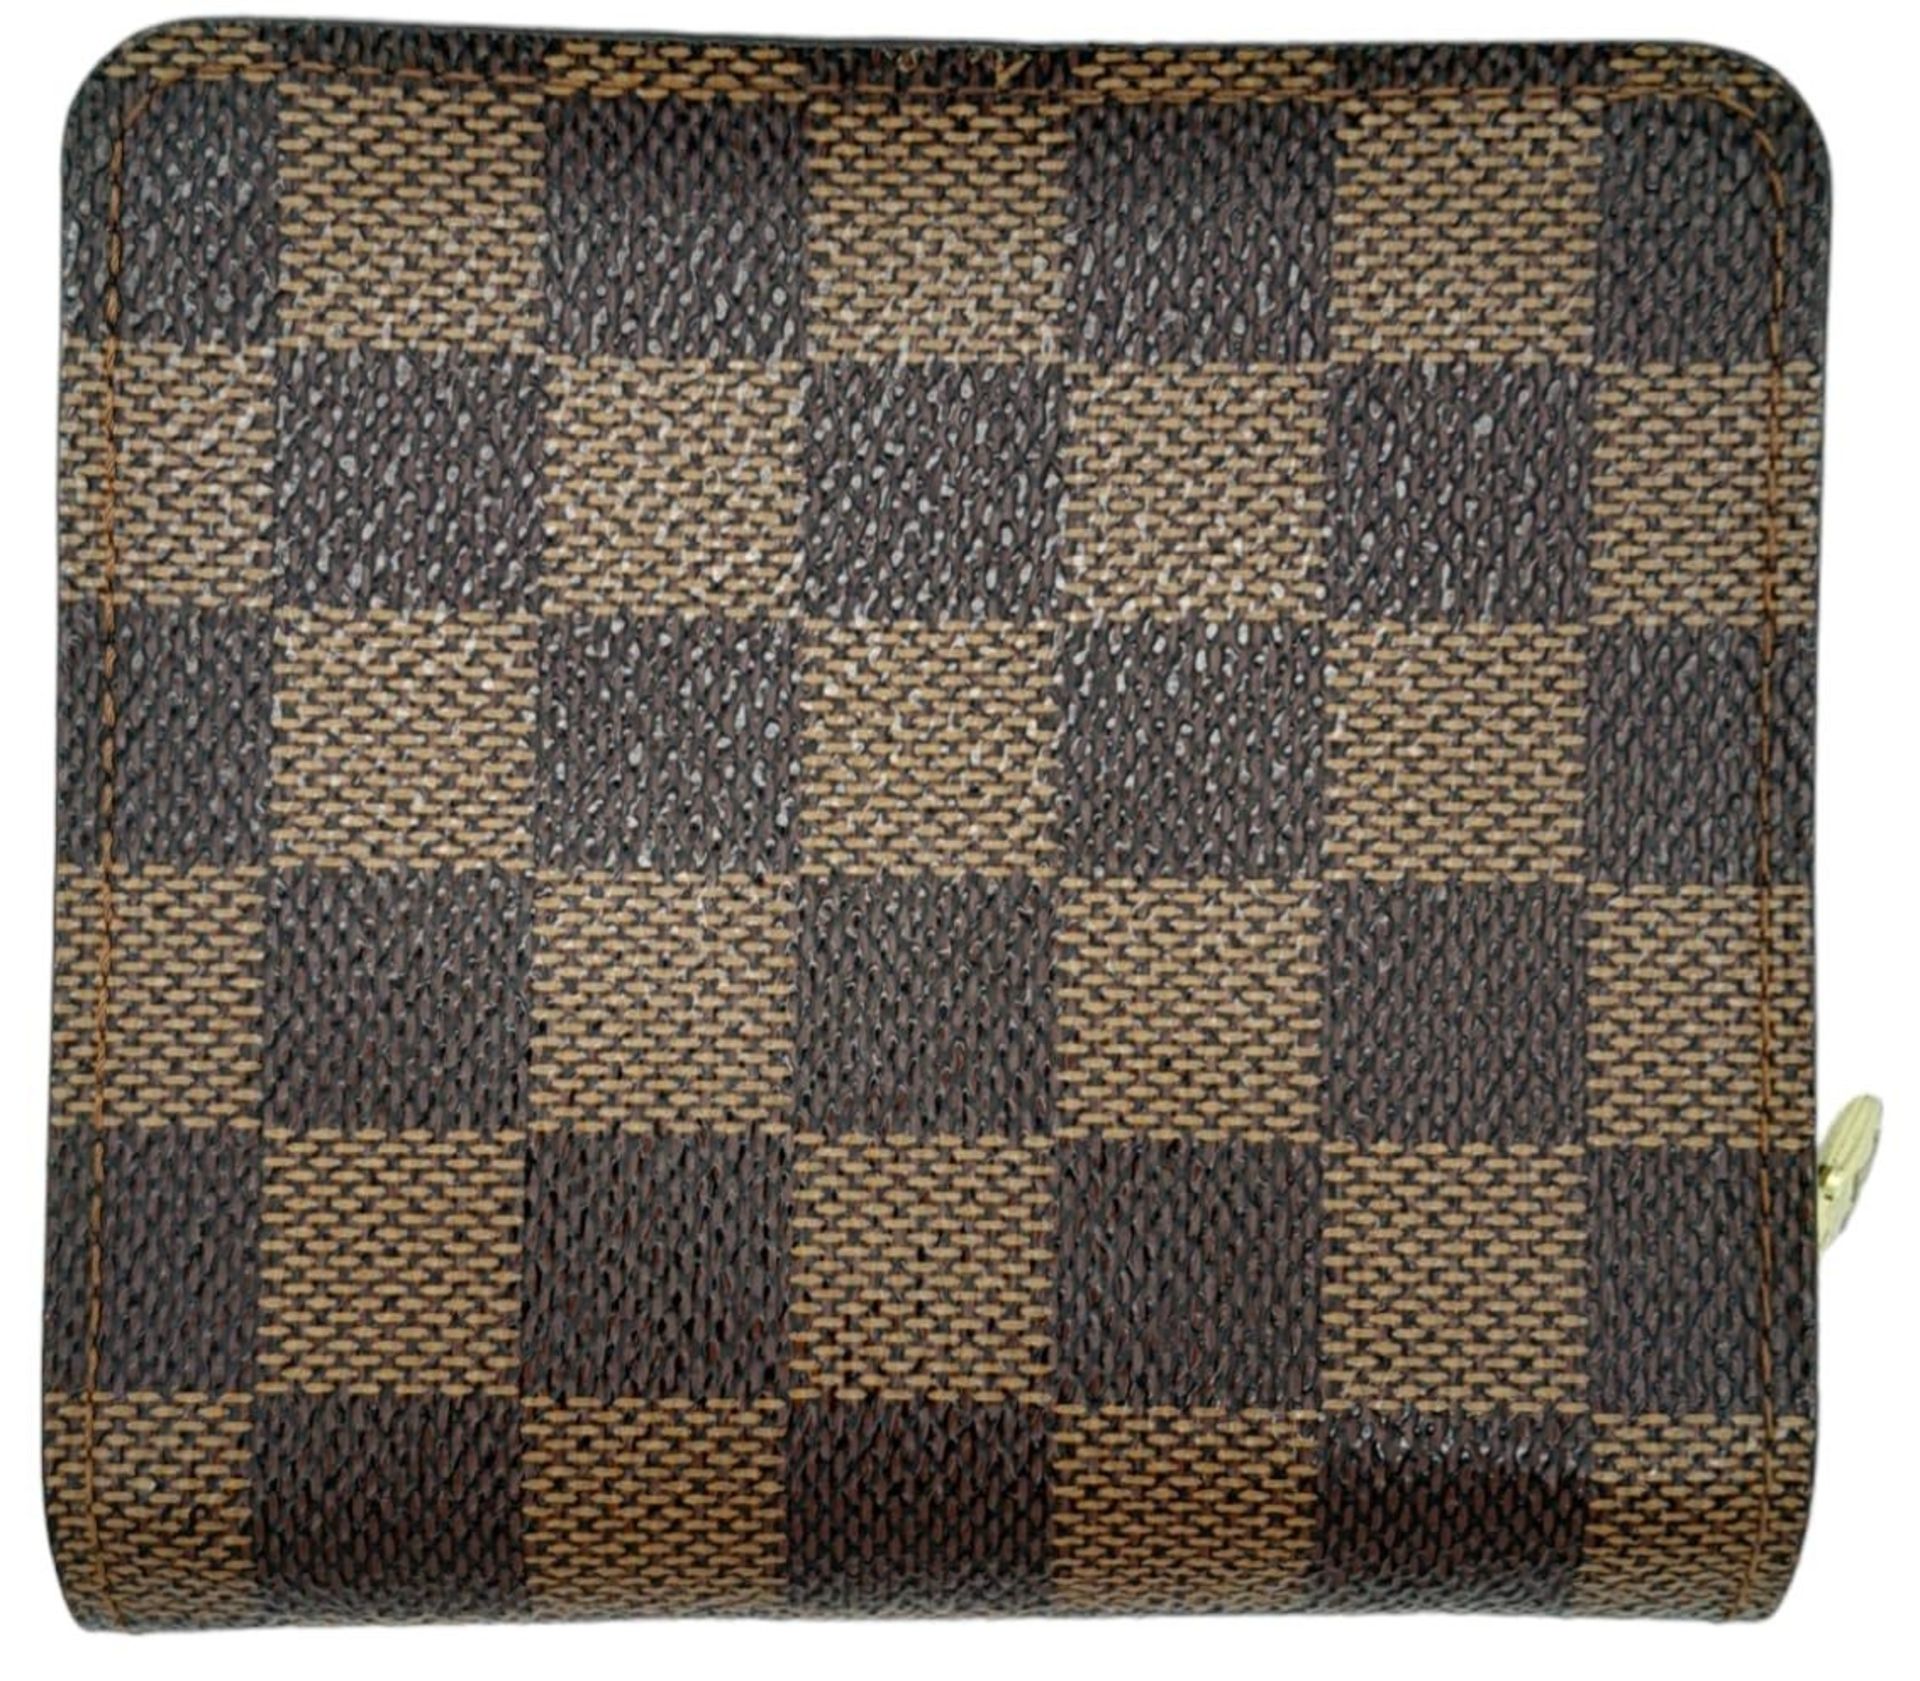 A Louis Vuitton Damier Ebene Canvas Compact Zippy Wallet. Leather Coated Canvas Exterior, Gold - Image 2 of 9